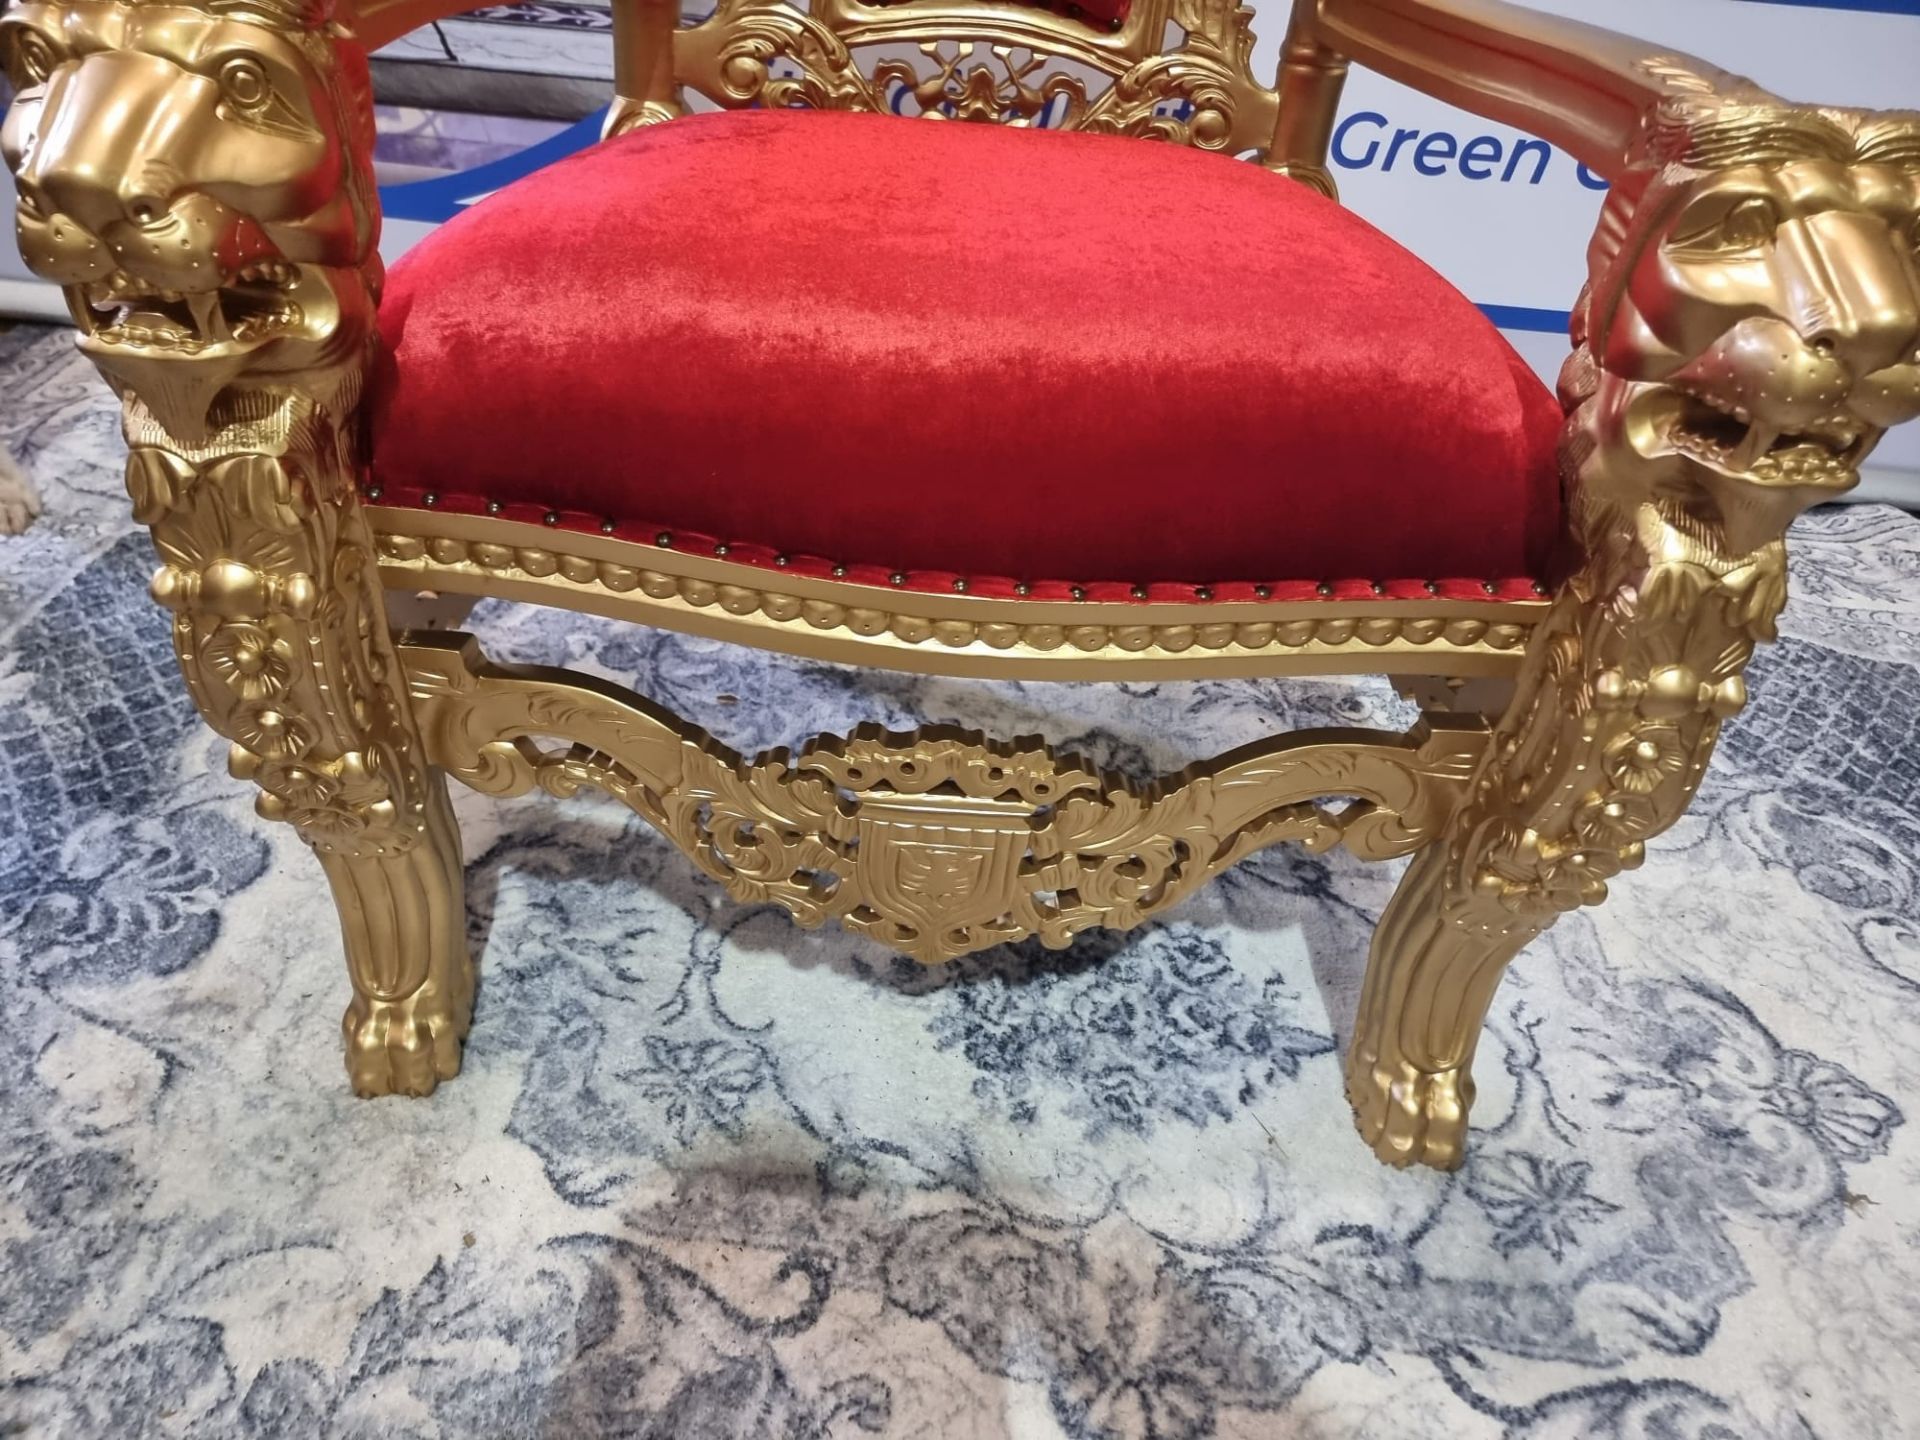 Handmade Mahogany Wood Painted Matt Gold Throne Chair Upholstered In A Pinned Red Velvet Exceptional - Image 12 of 18